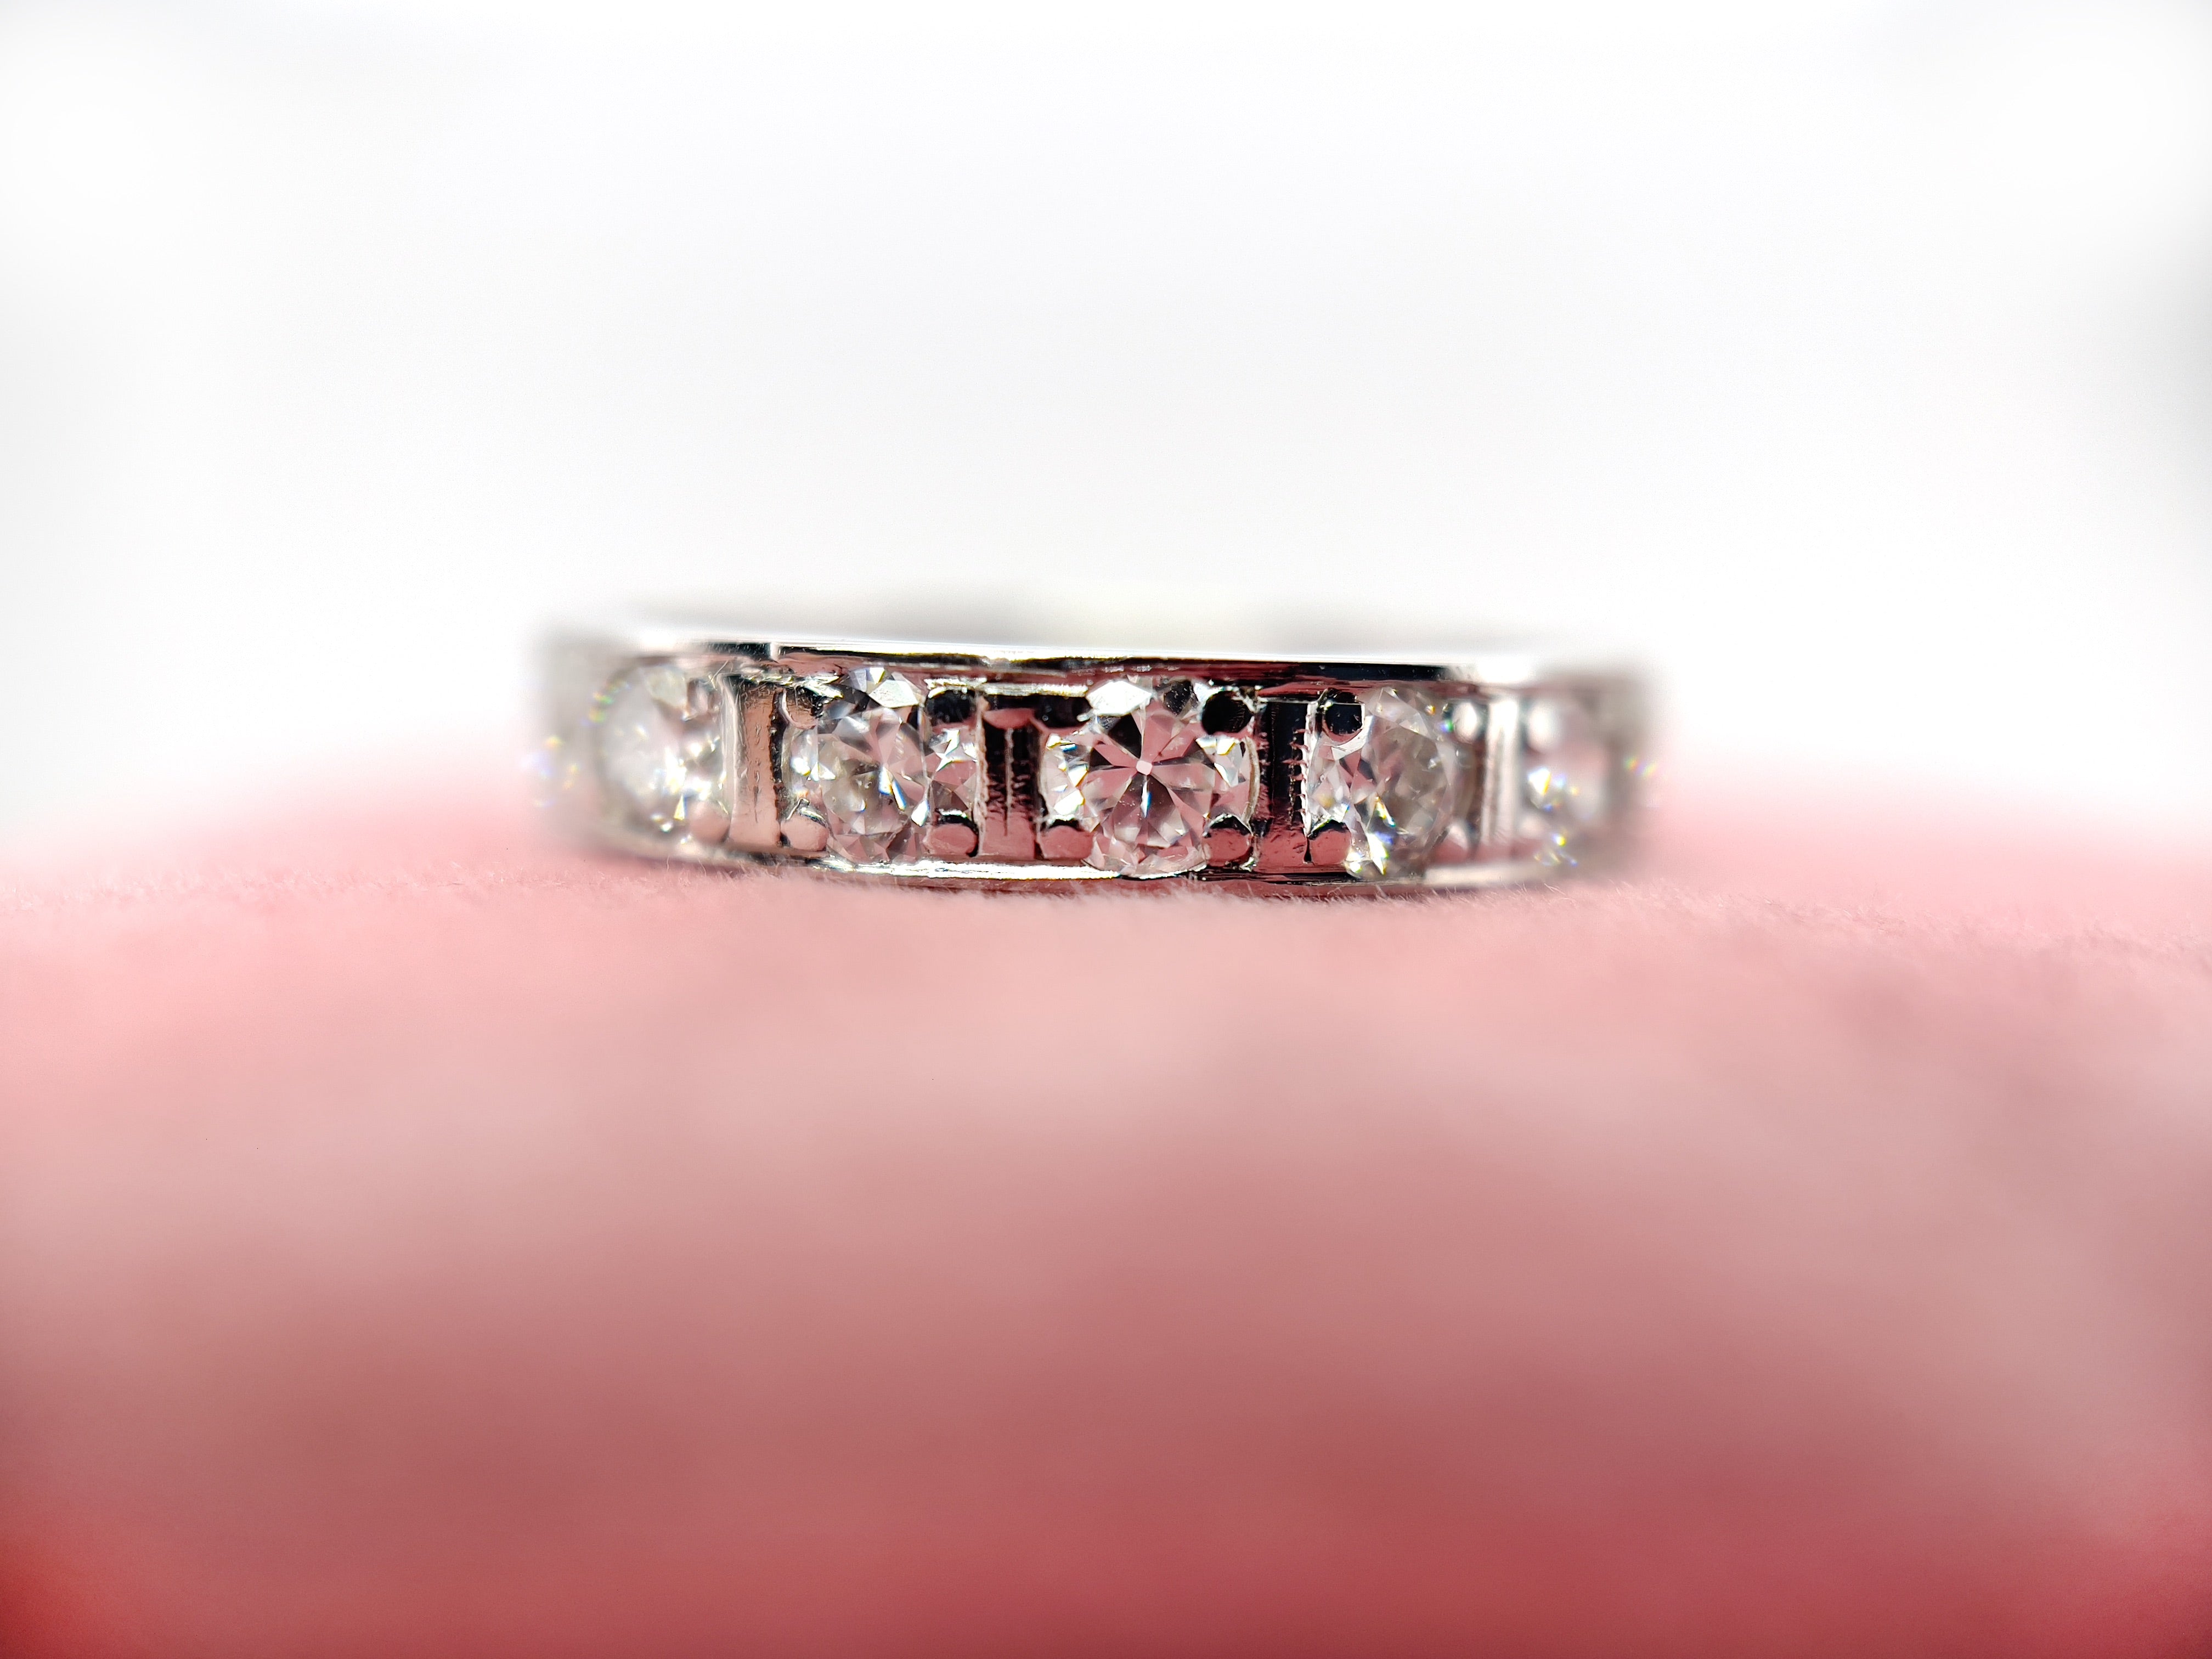 Art Deco Old European and Transitional Cut Diamond Eternity Ring, 1.58 cts, Platinum